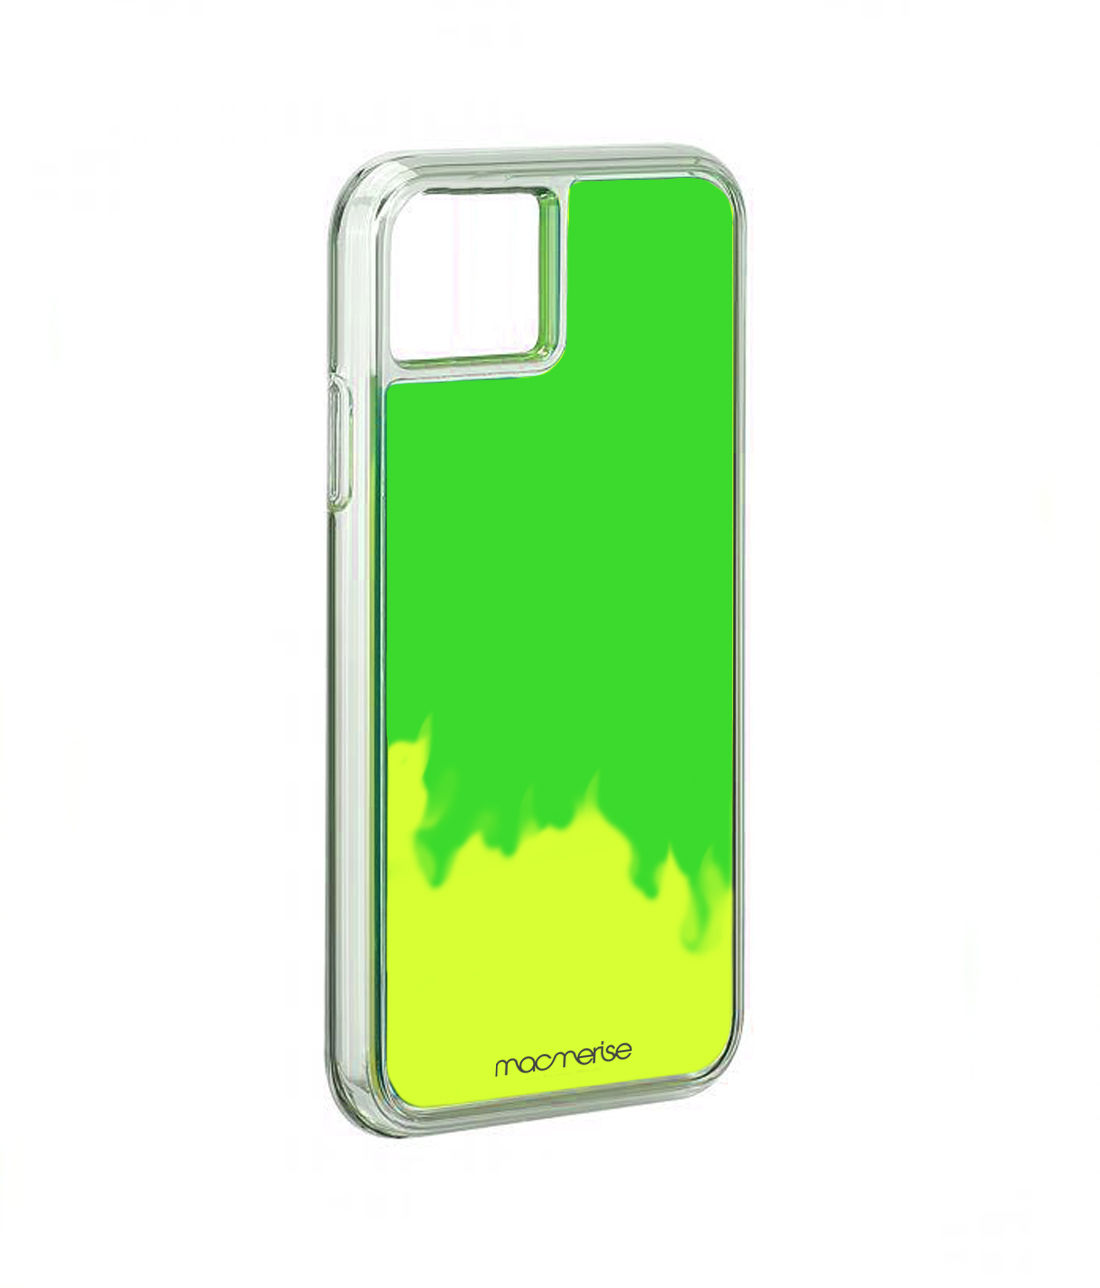 Neon Sand Green - Neon Sand Case for iPhone 12 Mini